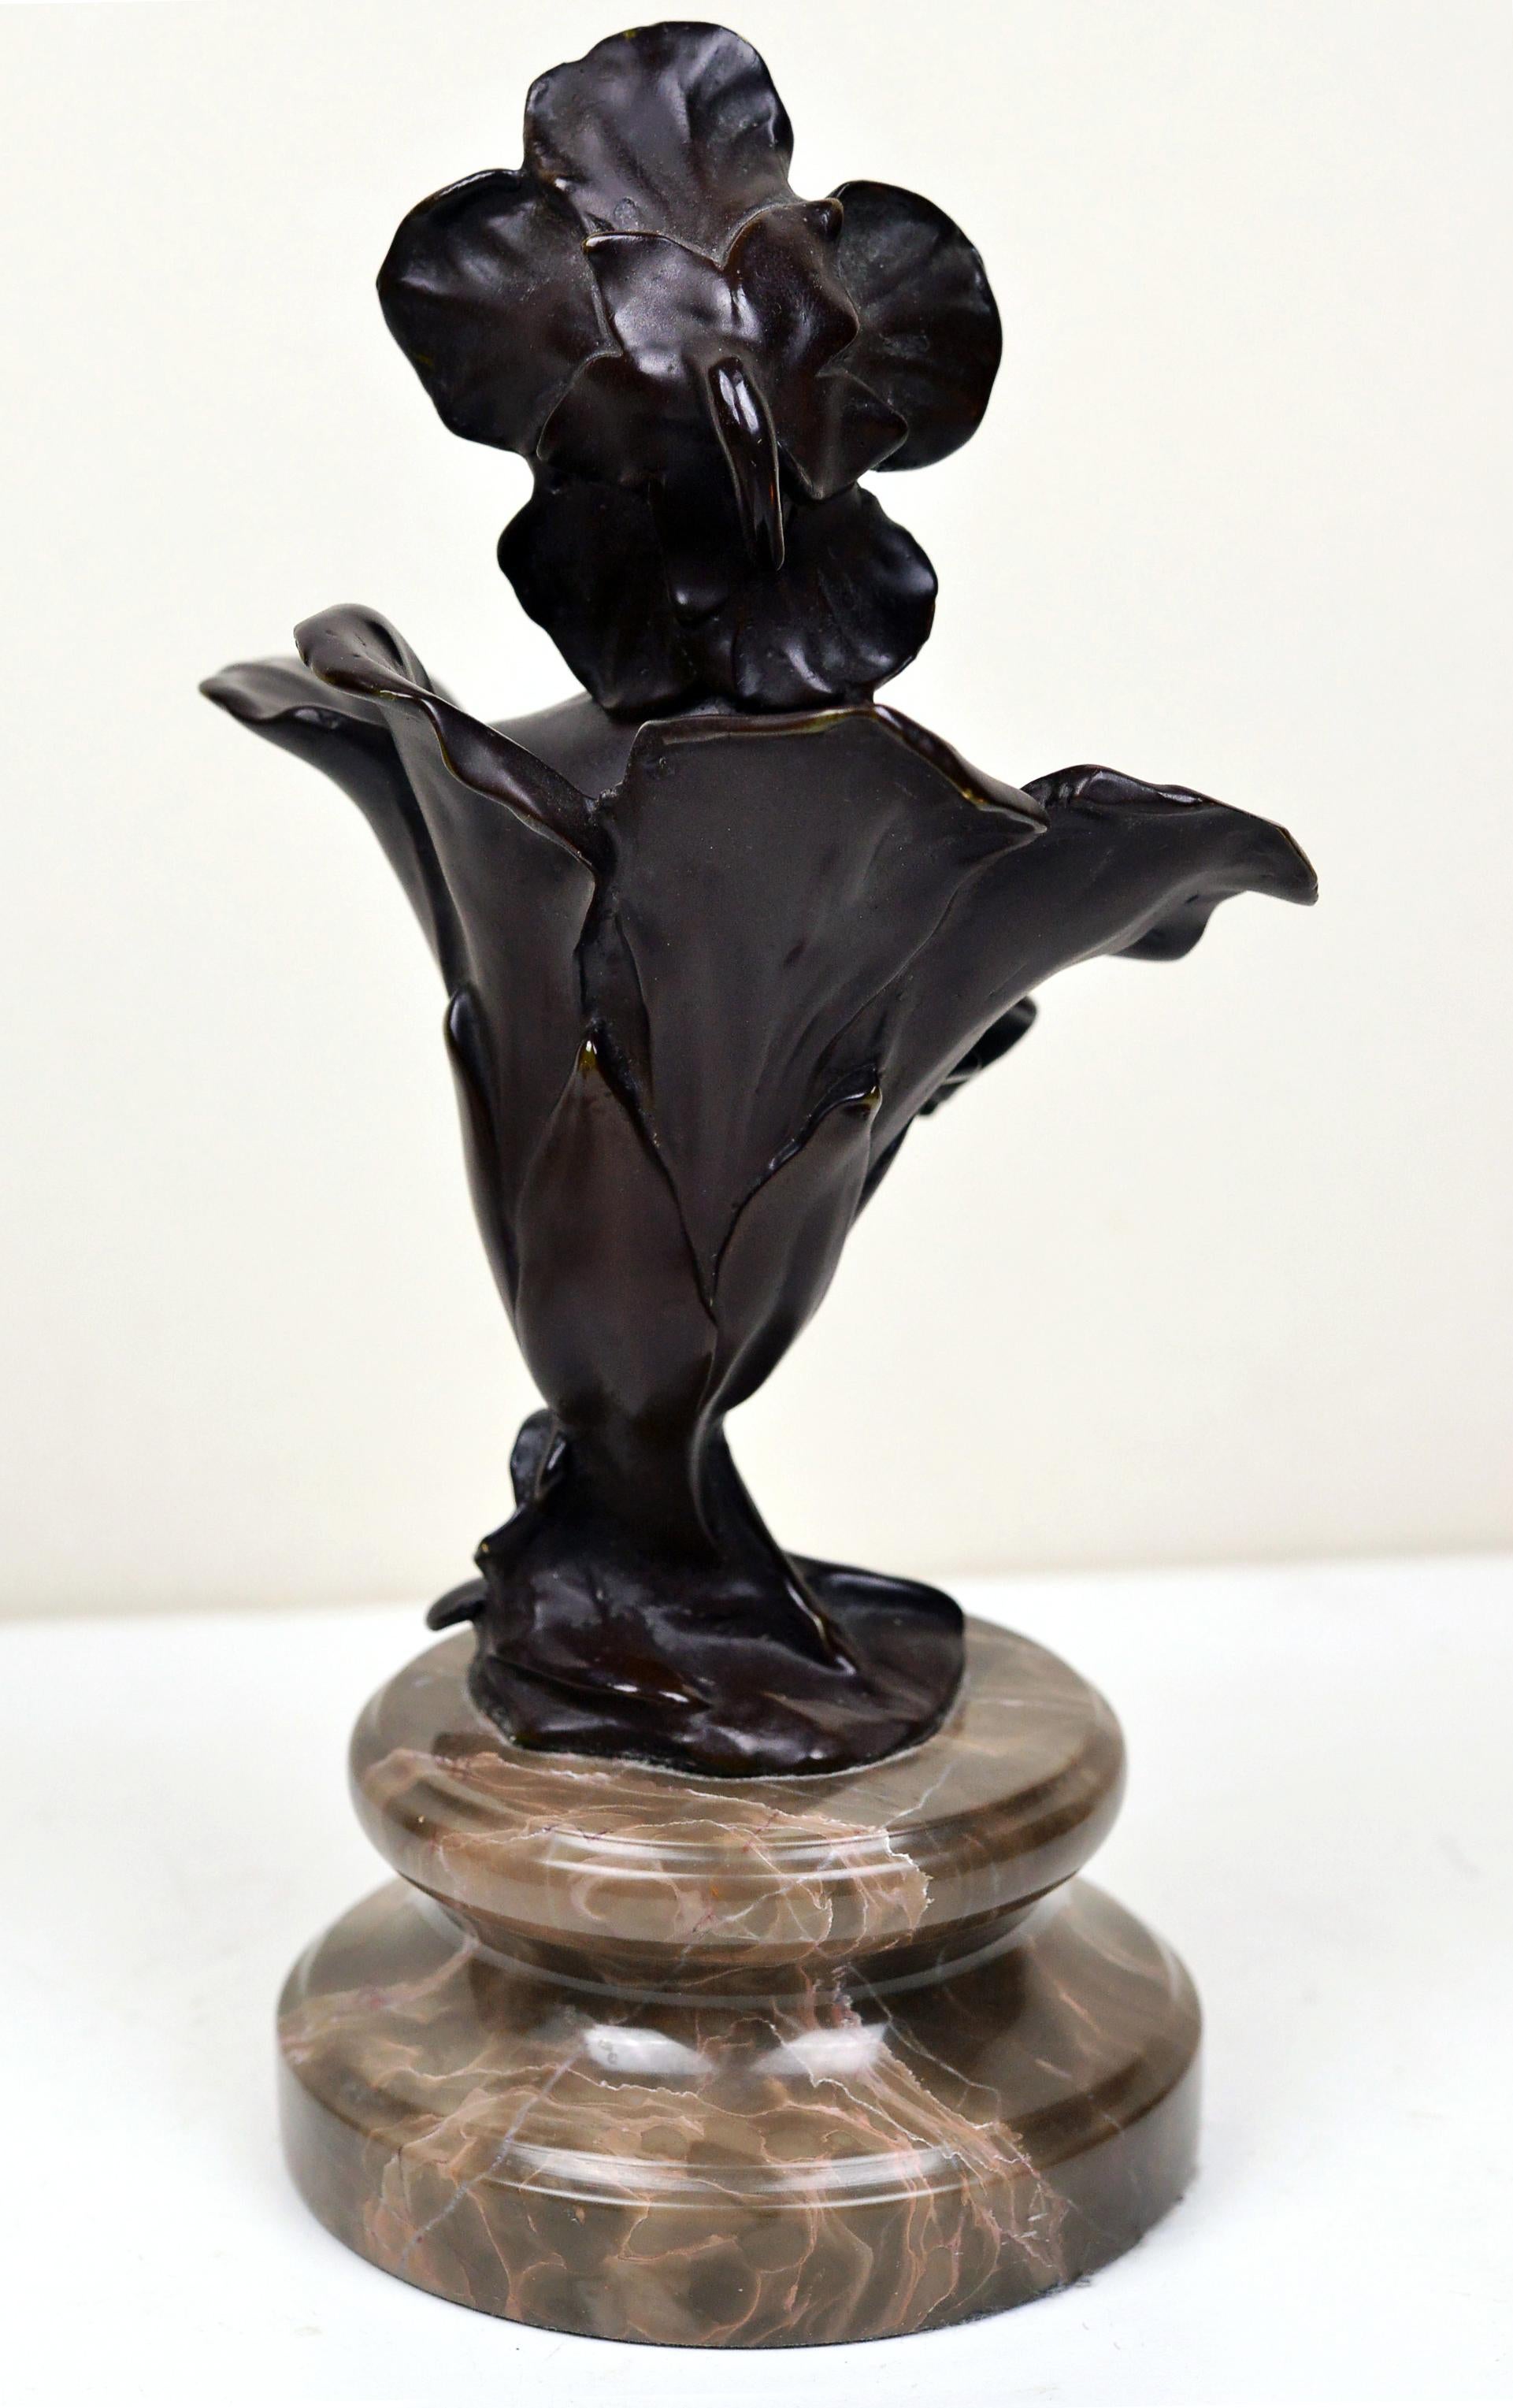 Figurine of Thumbelina Patinated Bronze n Stone Base 19th Century Art Nouveau For Sale 2